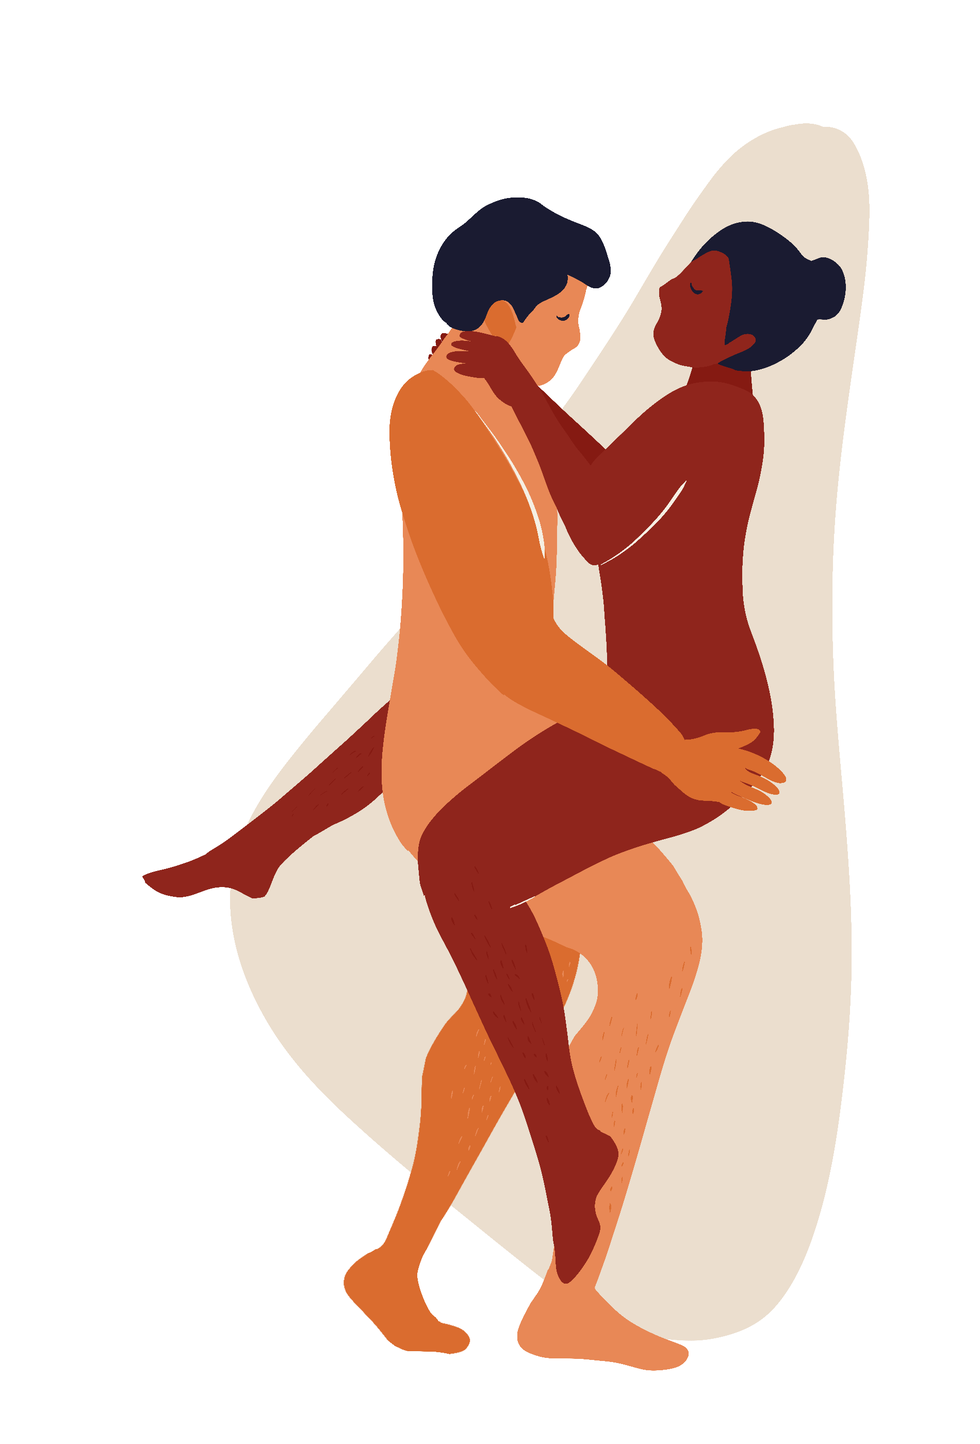 Karma Sutra Sex Positions - 15 Kama Sutra Sex Positions That Couples Can Easily Pull Off